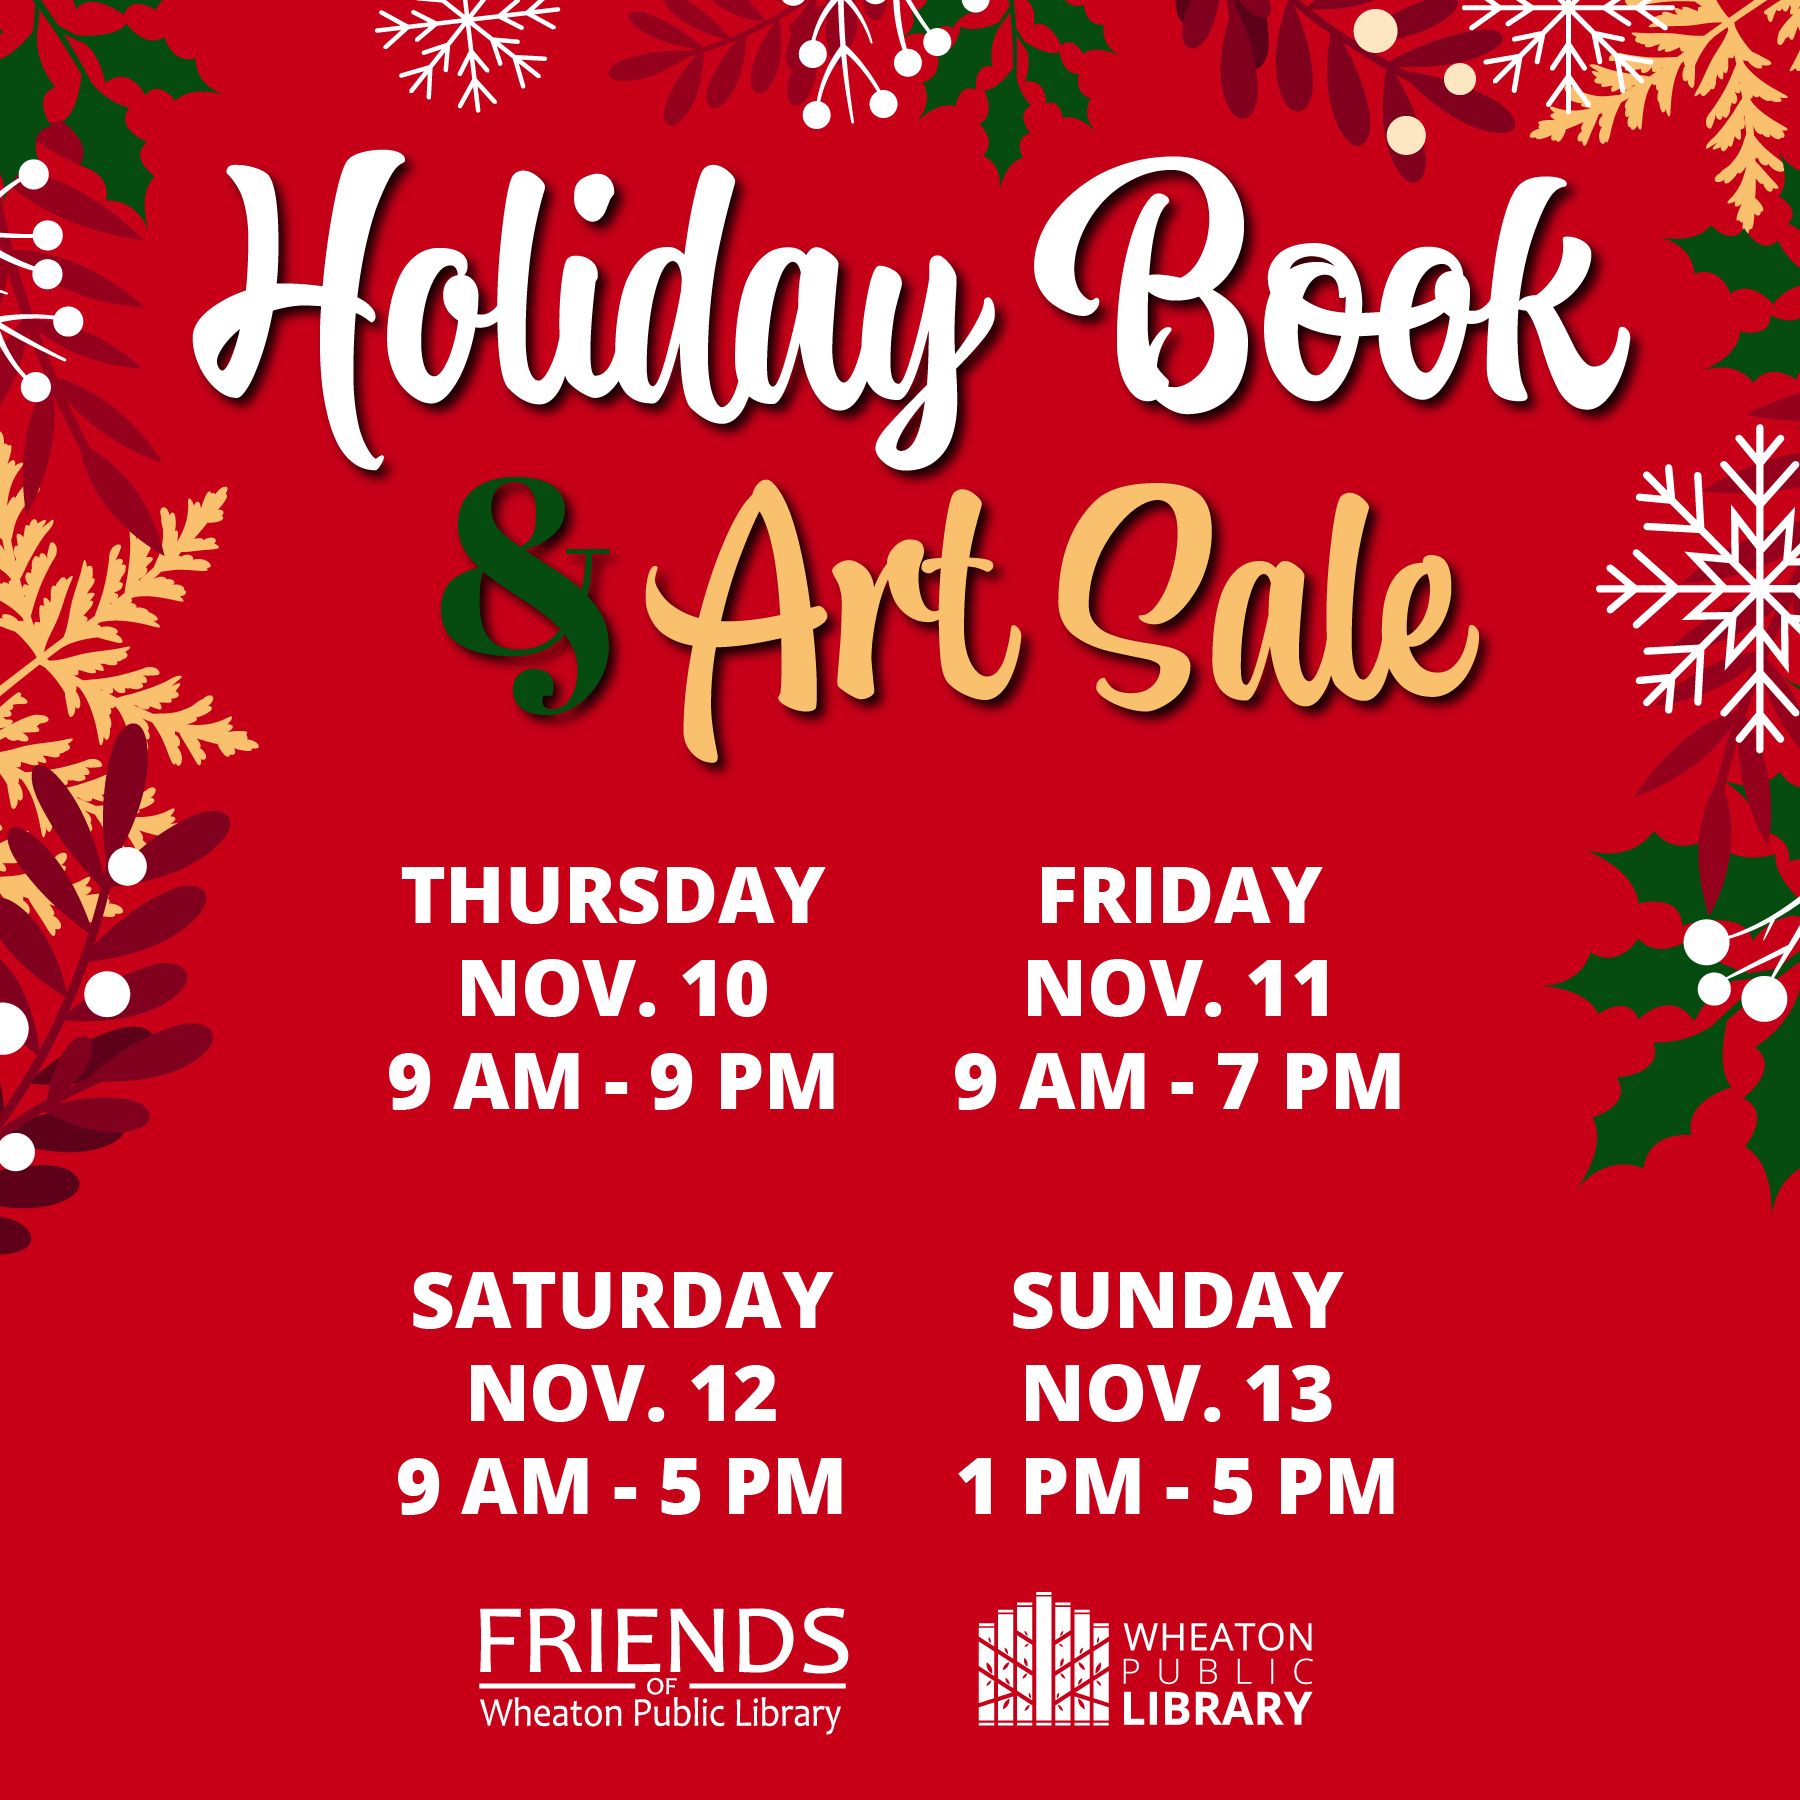 "Holiday Book & Art Sale" text on a red background with snowflakes and greenery